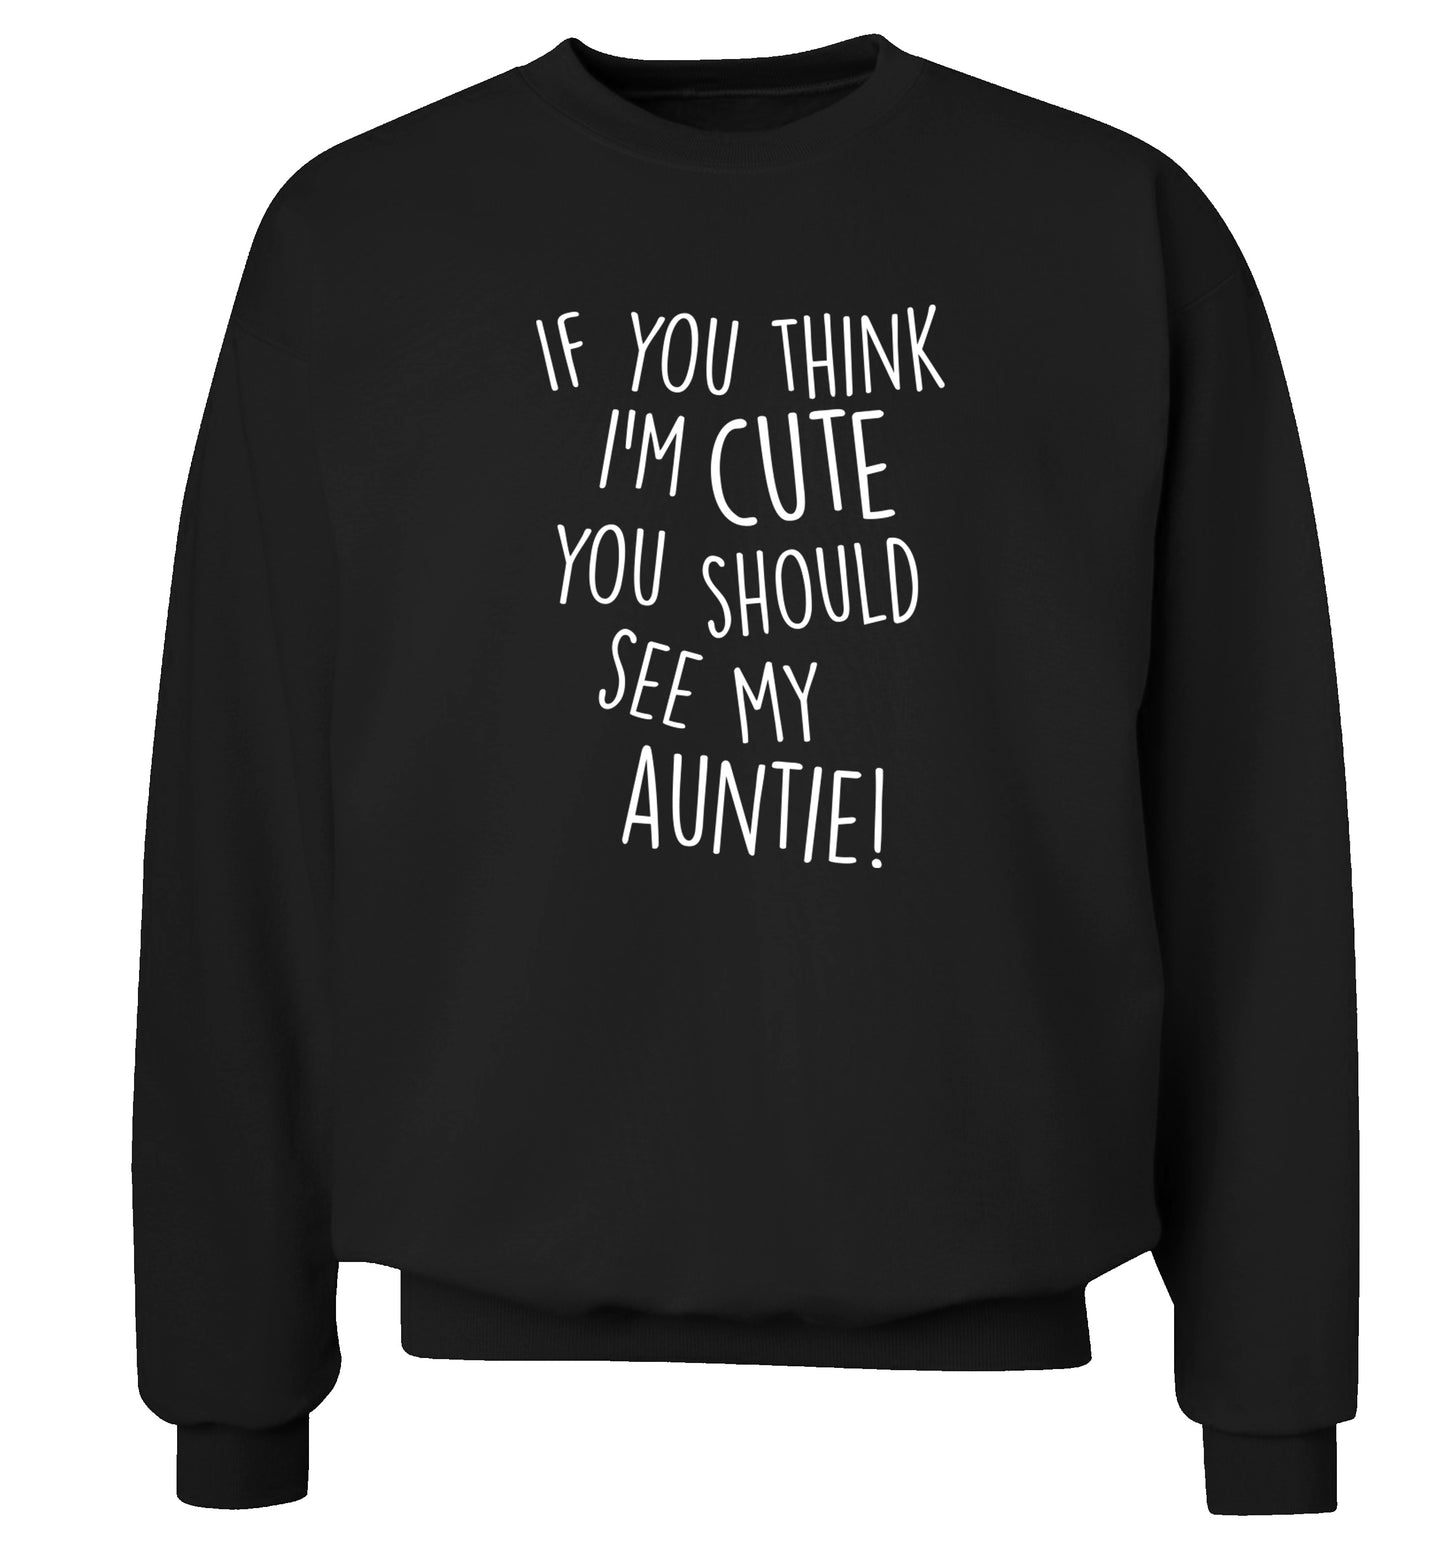 If you think I'm cute you should see my auntie Adult's unisex black Sweater 2XL